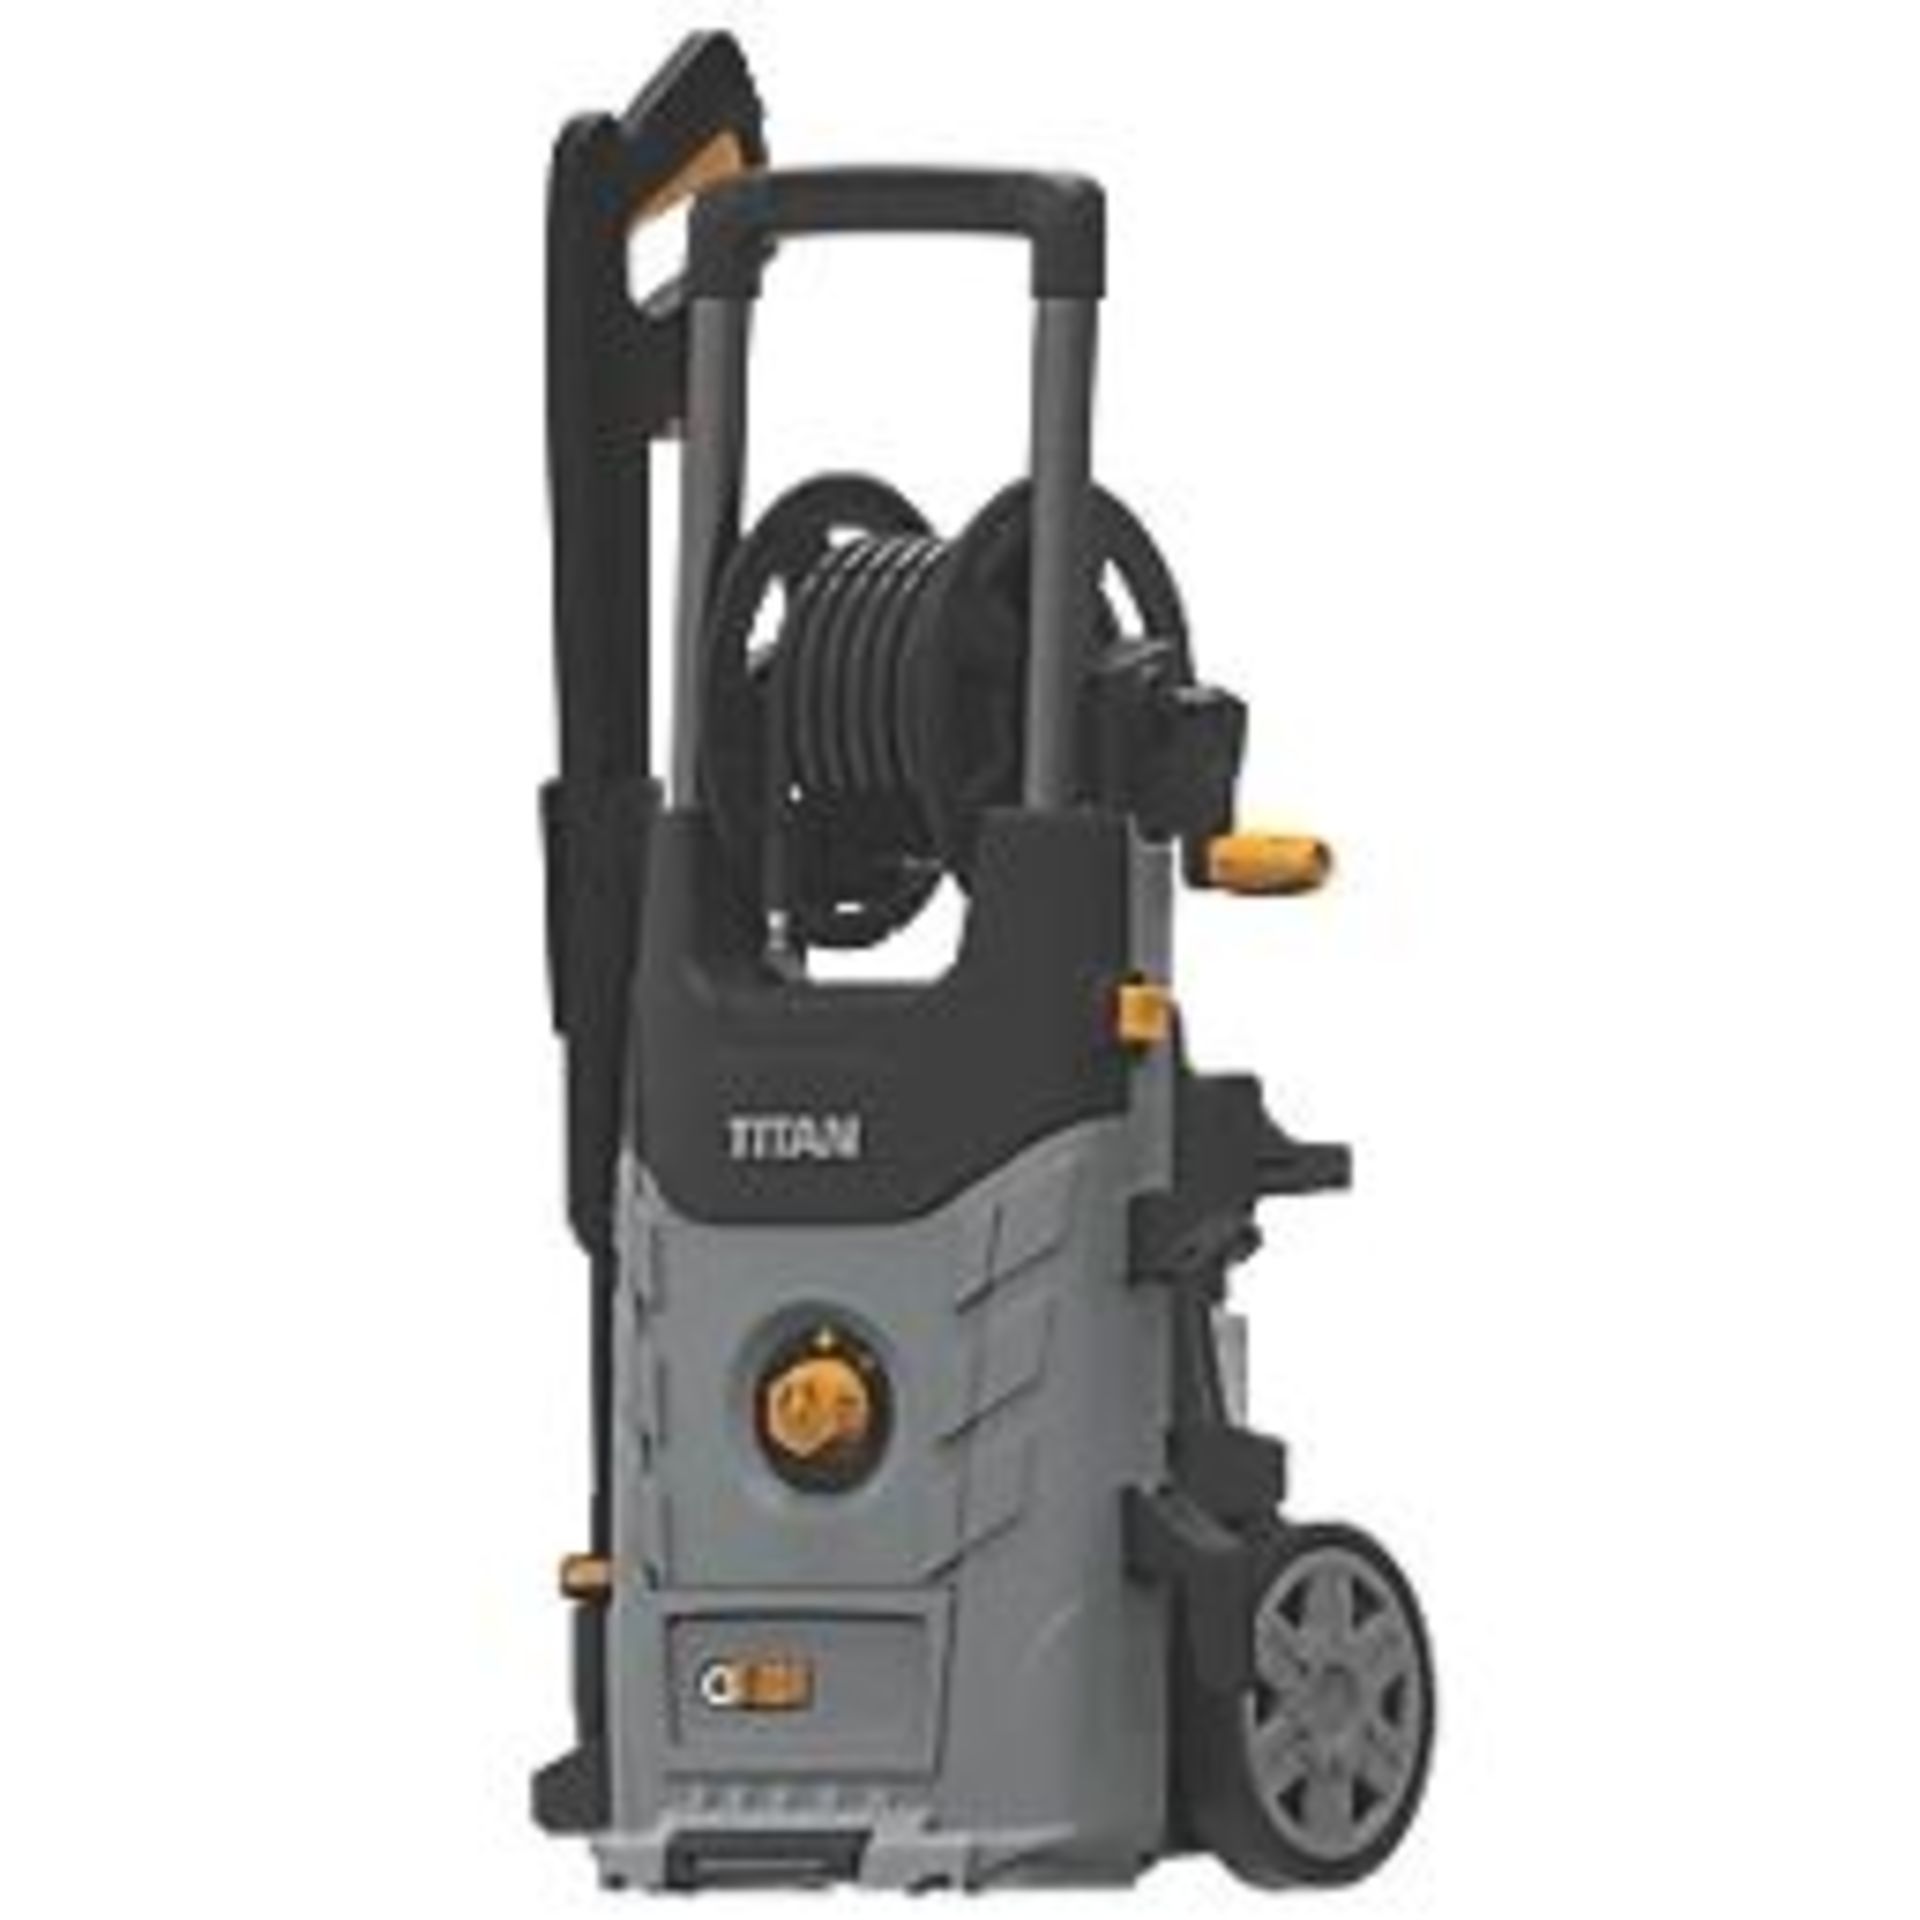 TITAN TTB2200PRW 150BAR ELECTRIC HIGH PRESSURE WASHER 2.2KW 230V. - S2.3. Compact design with